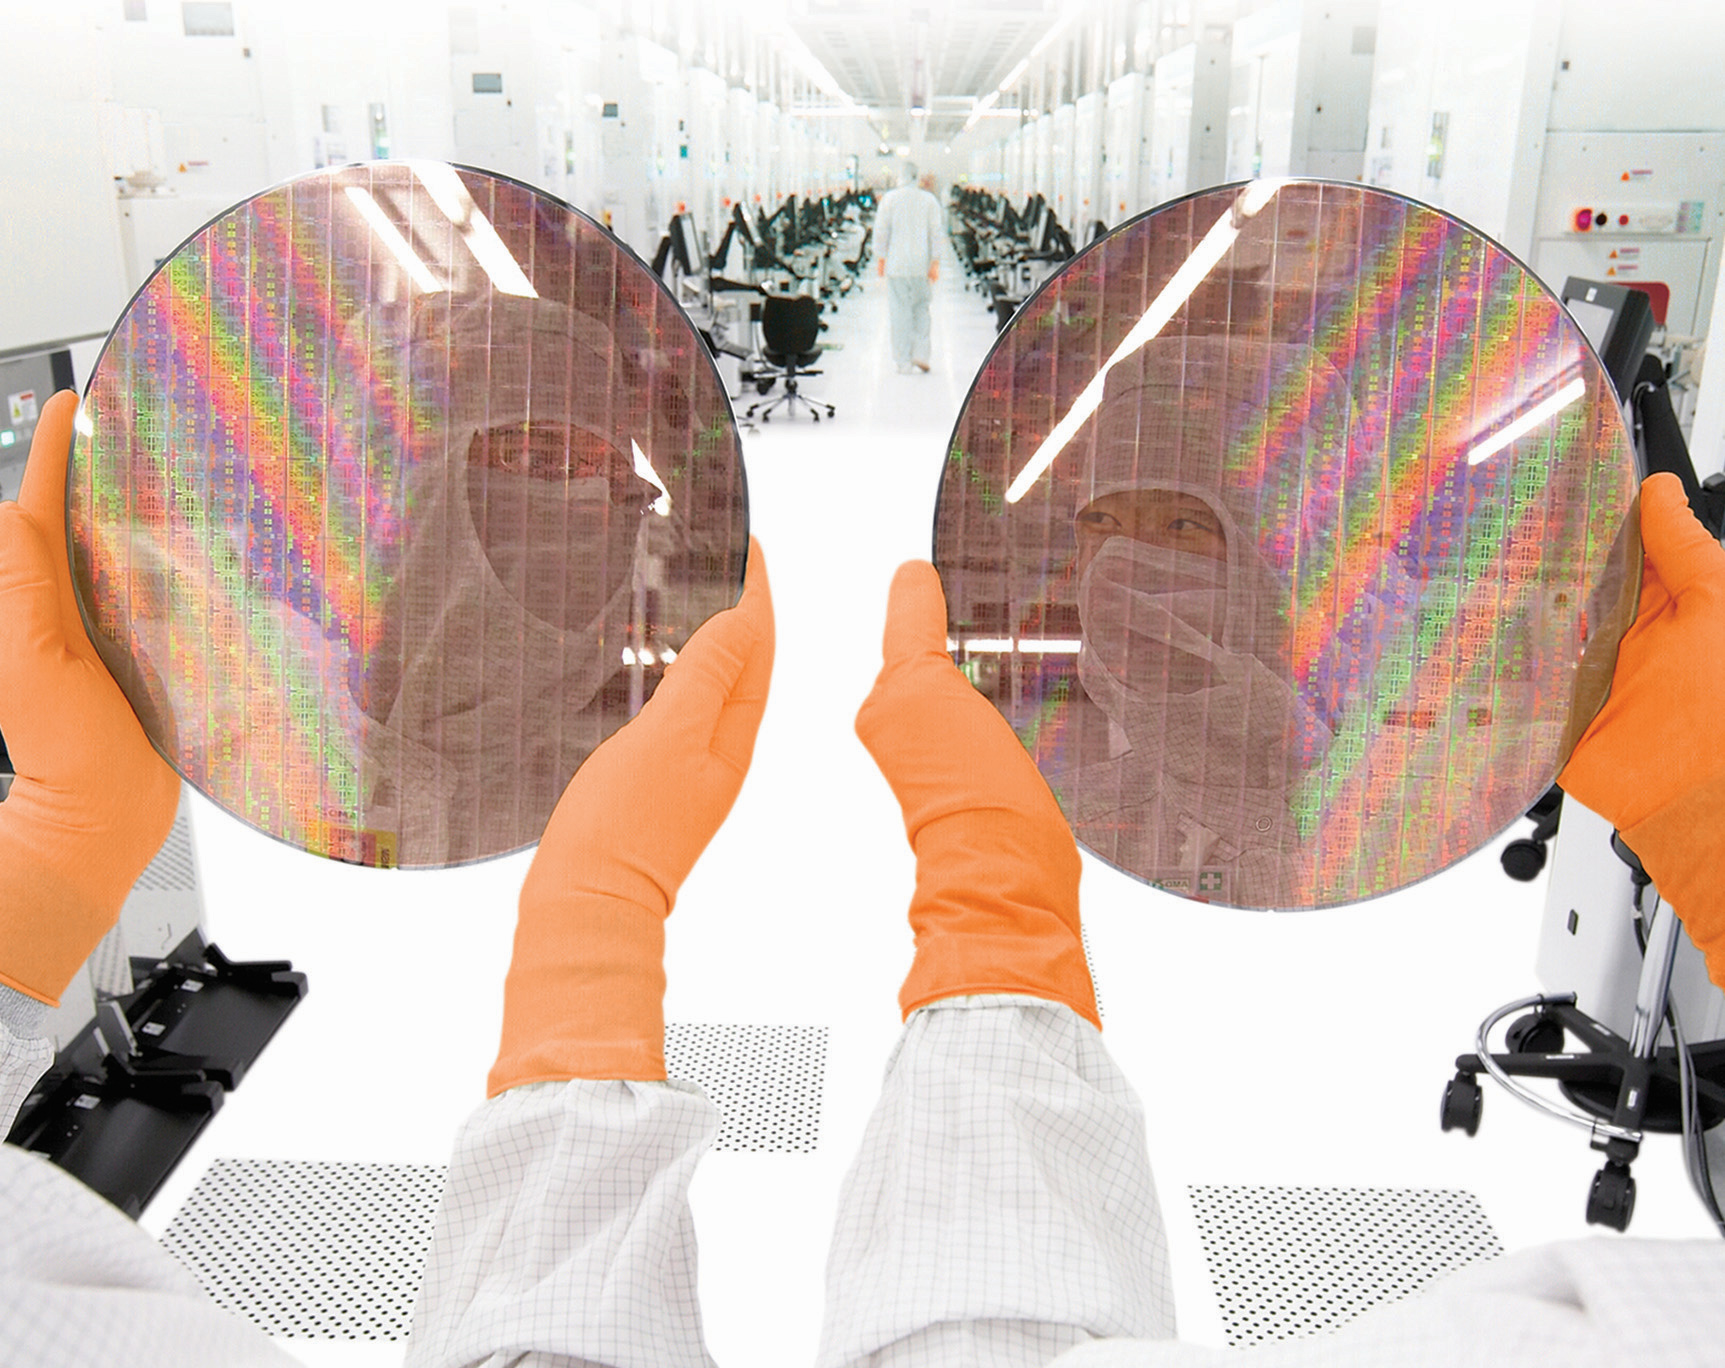 globalfoundries_semiconductor_wafers_300mm